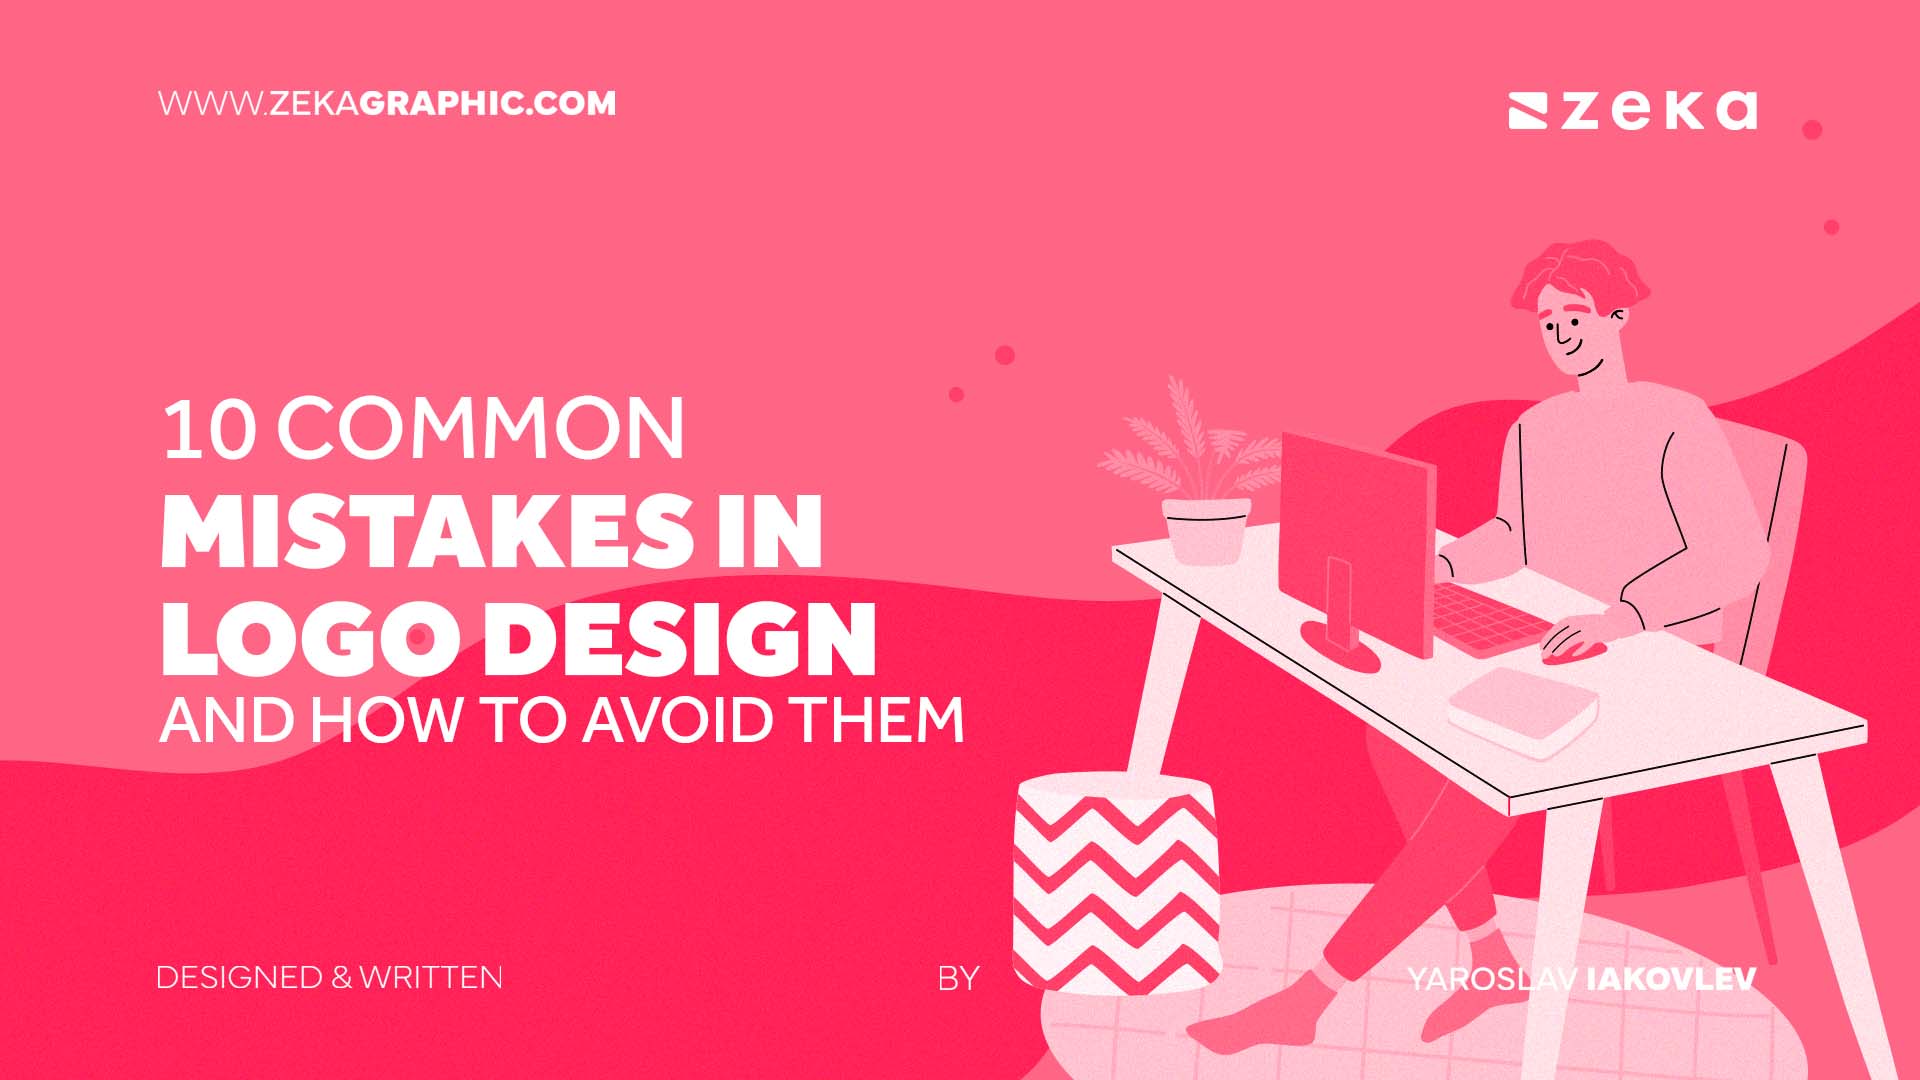 10 Common Mistakes in Logo Design and How To Avoid Them - Zeka Design